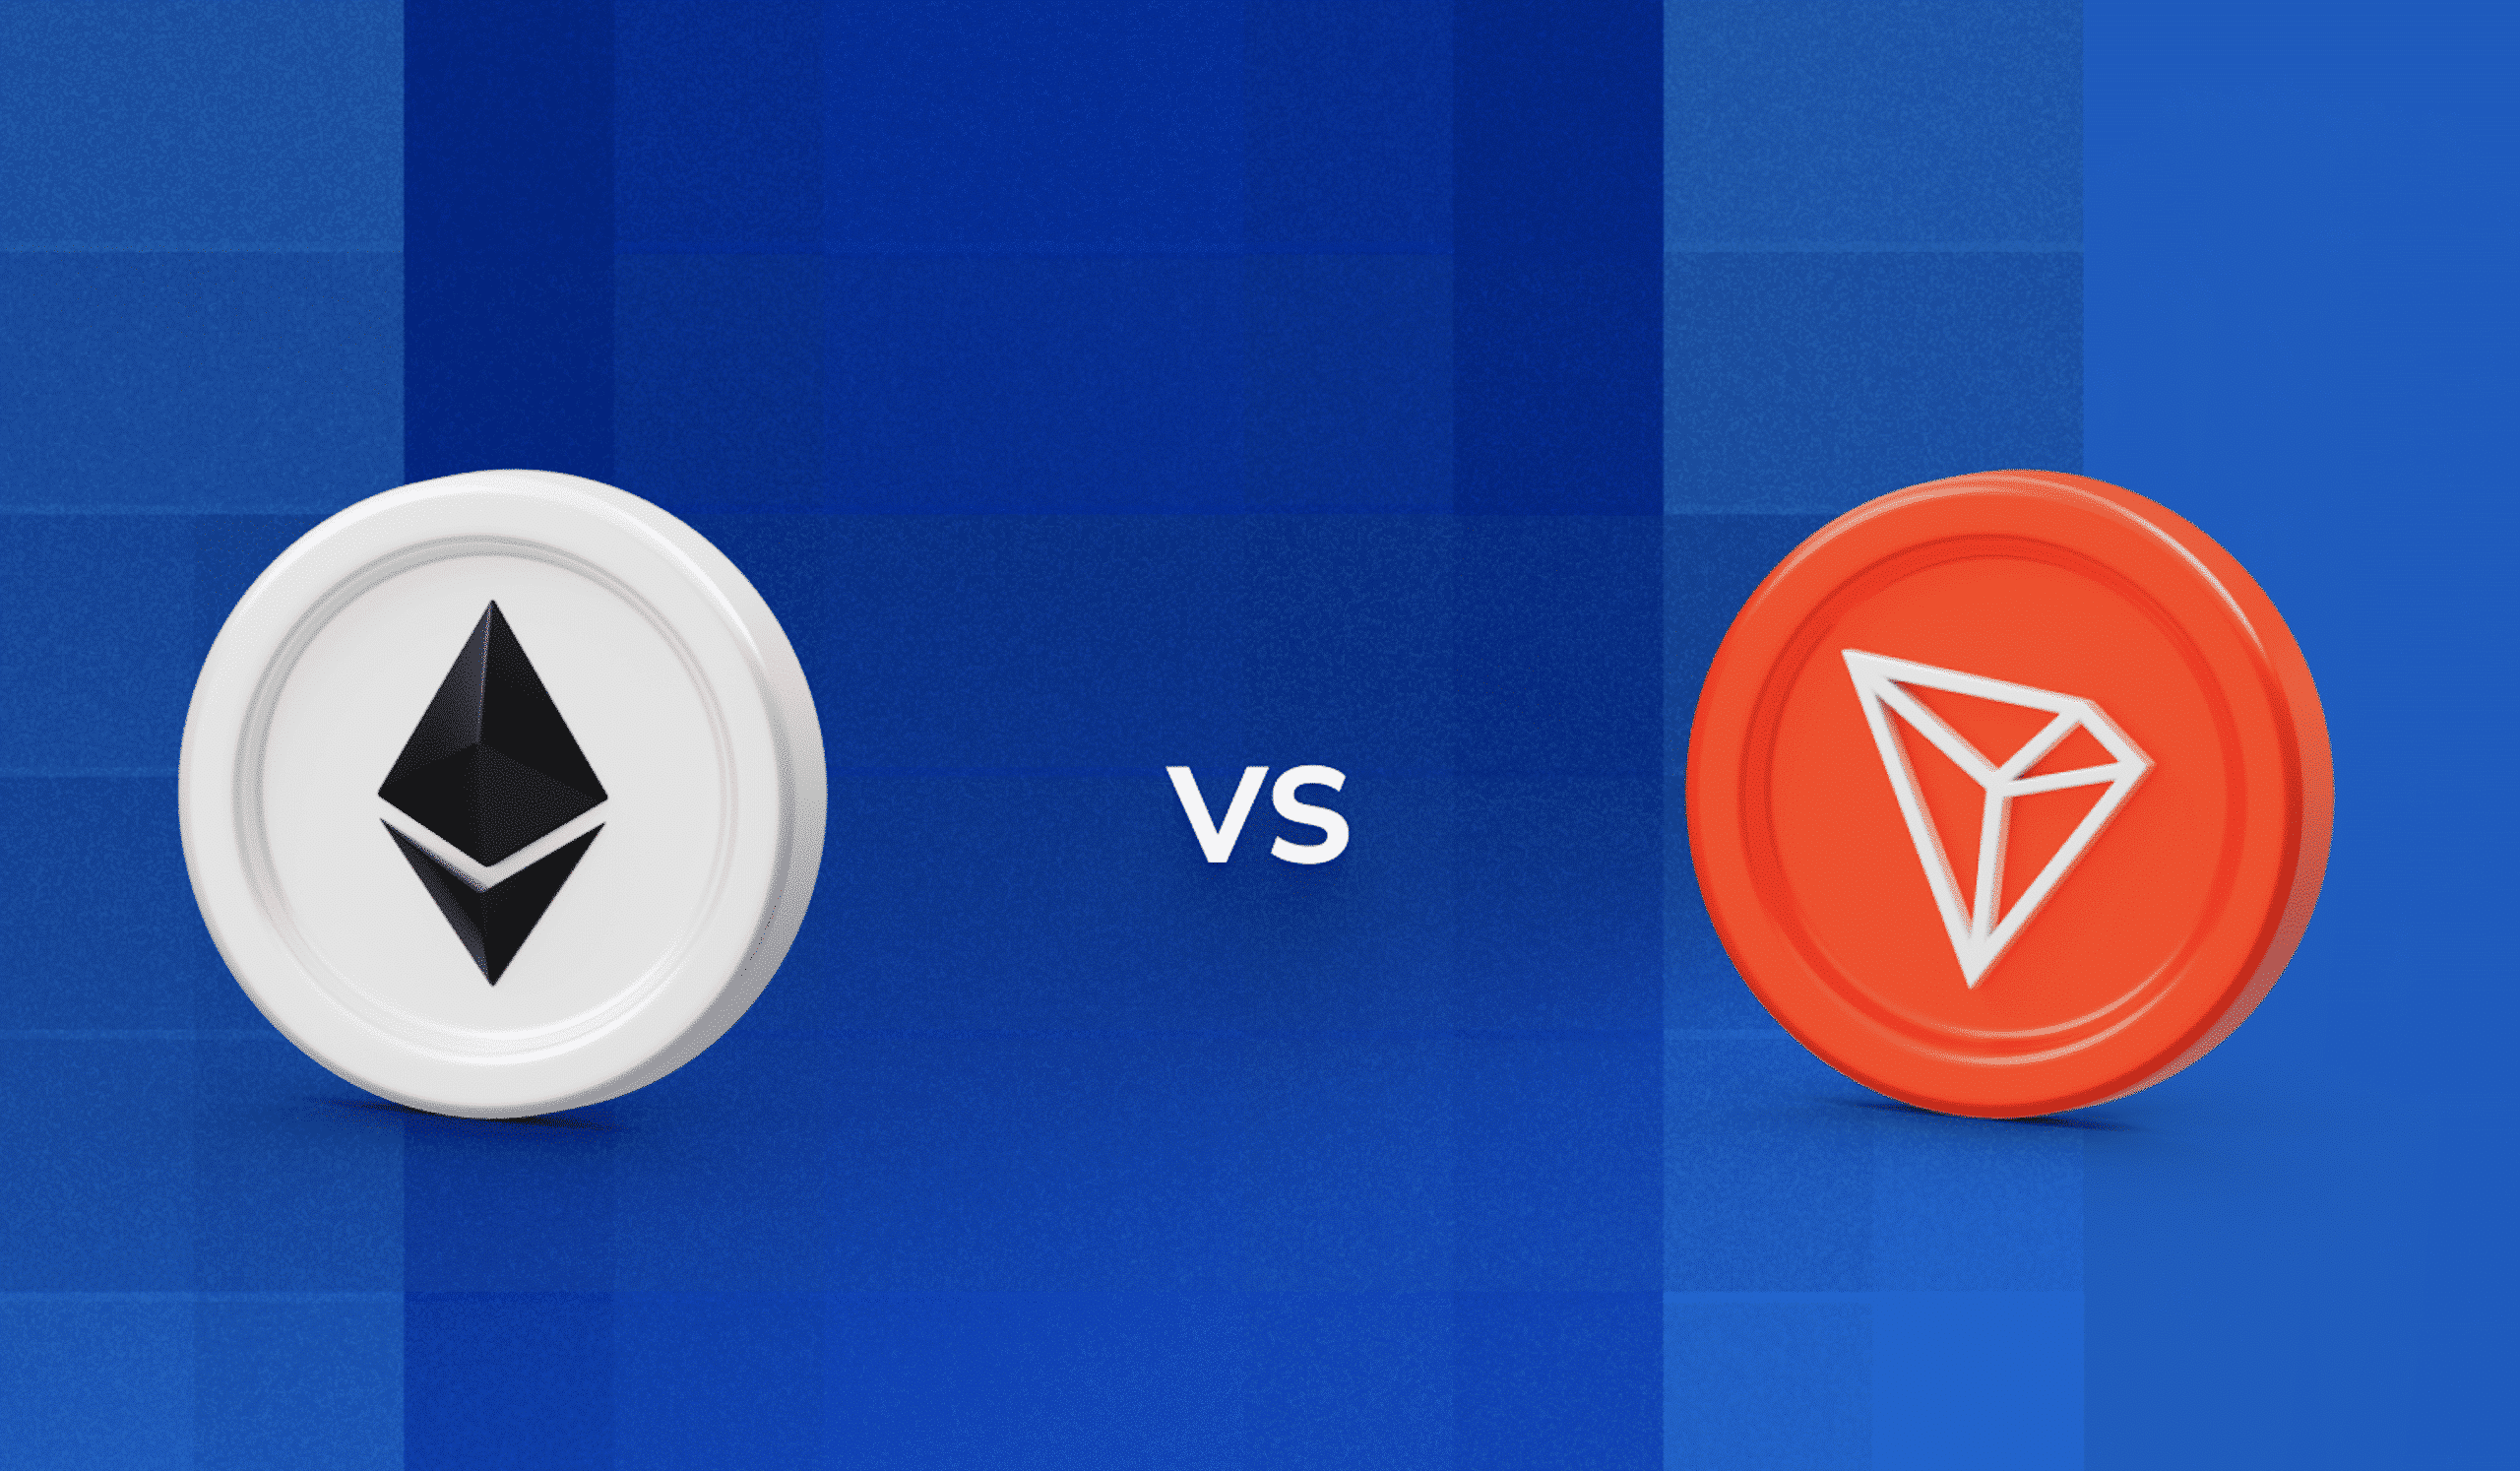 What is better, transferring USDT via the Ethereum network or the Tron network?